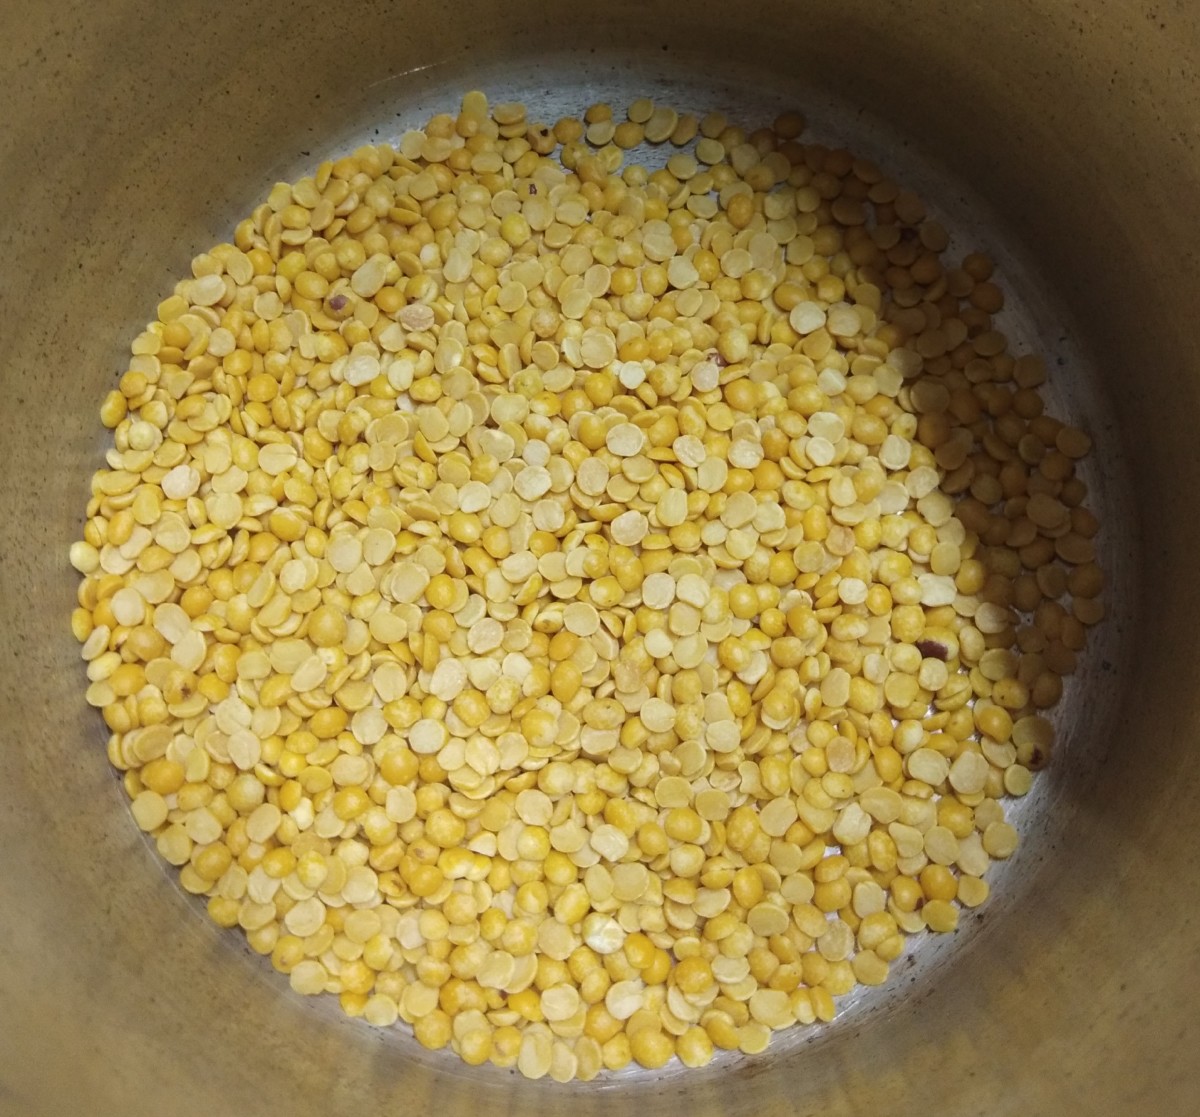 Add one cup of toor dal (pigeon pea lentils) in a cooker.